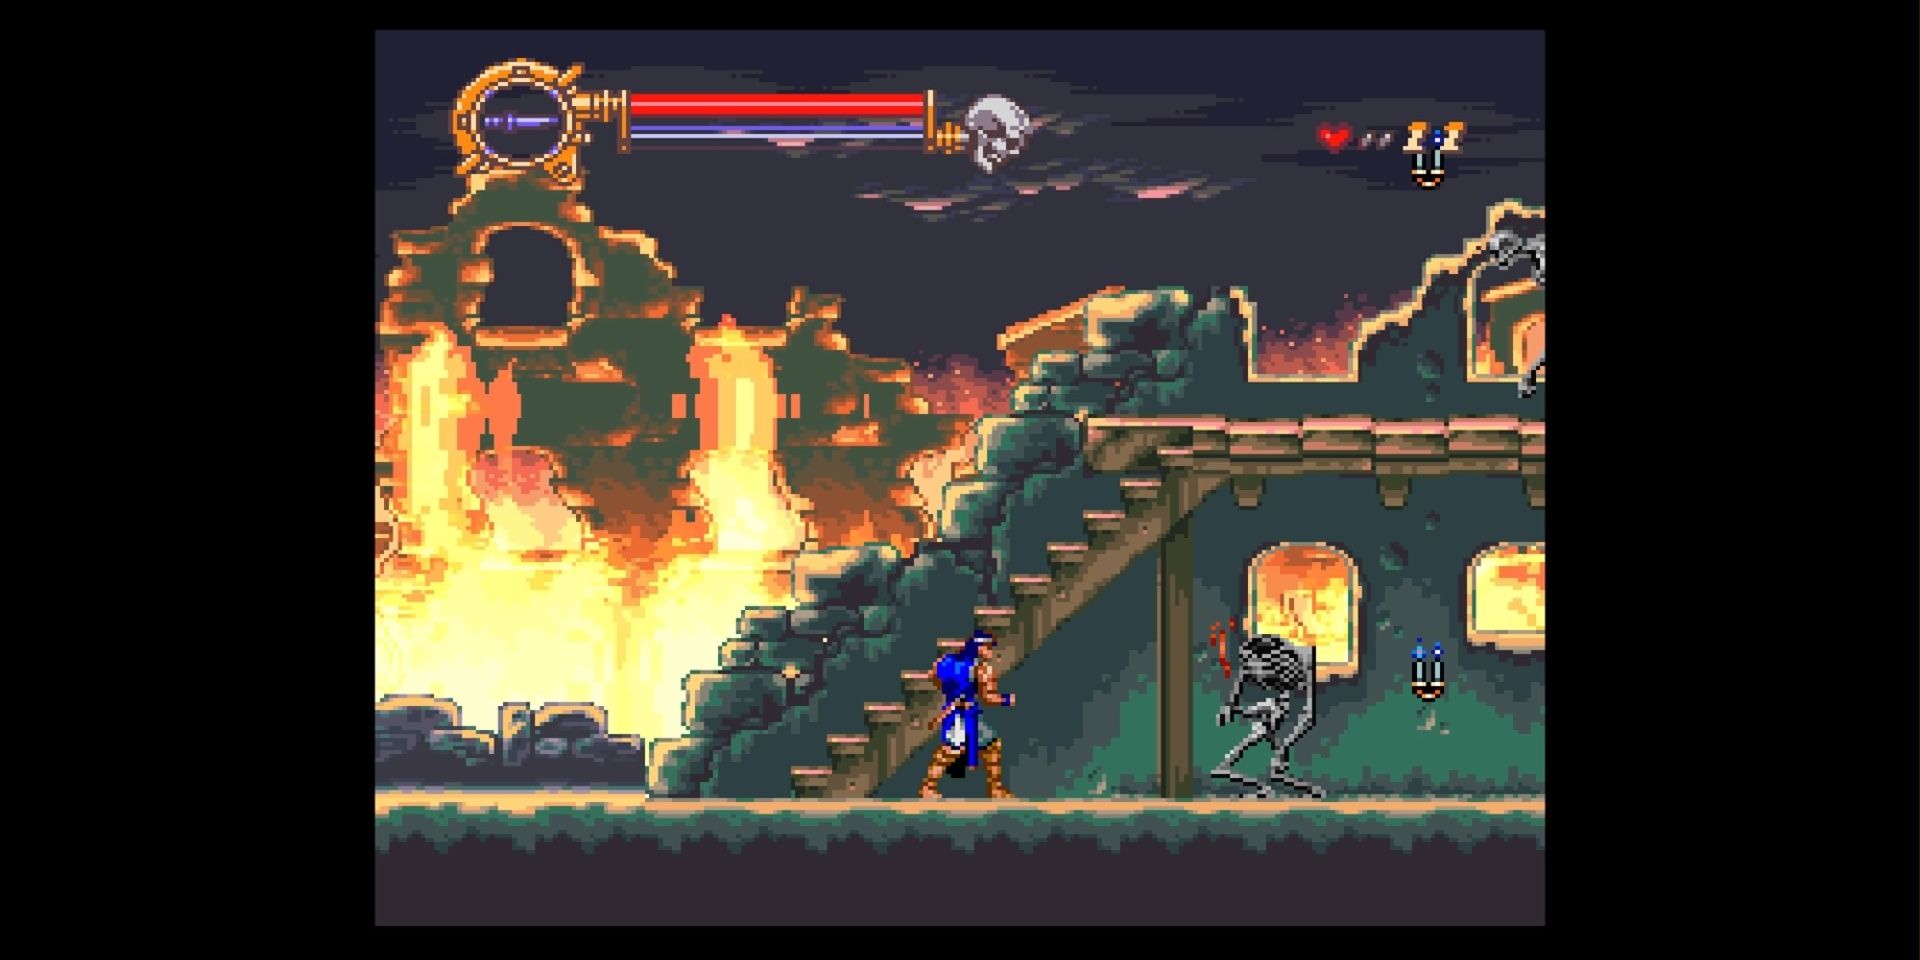 Castlevania Vampire's Kiss Richter staring down a skeleton while a village burns